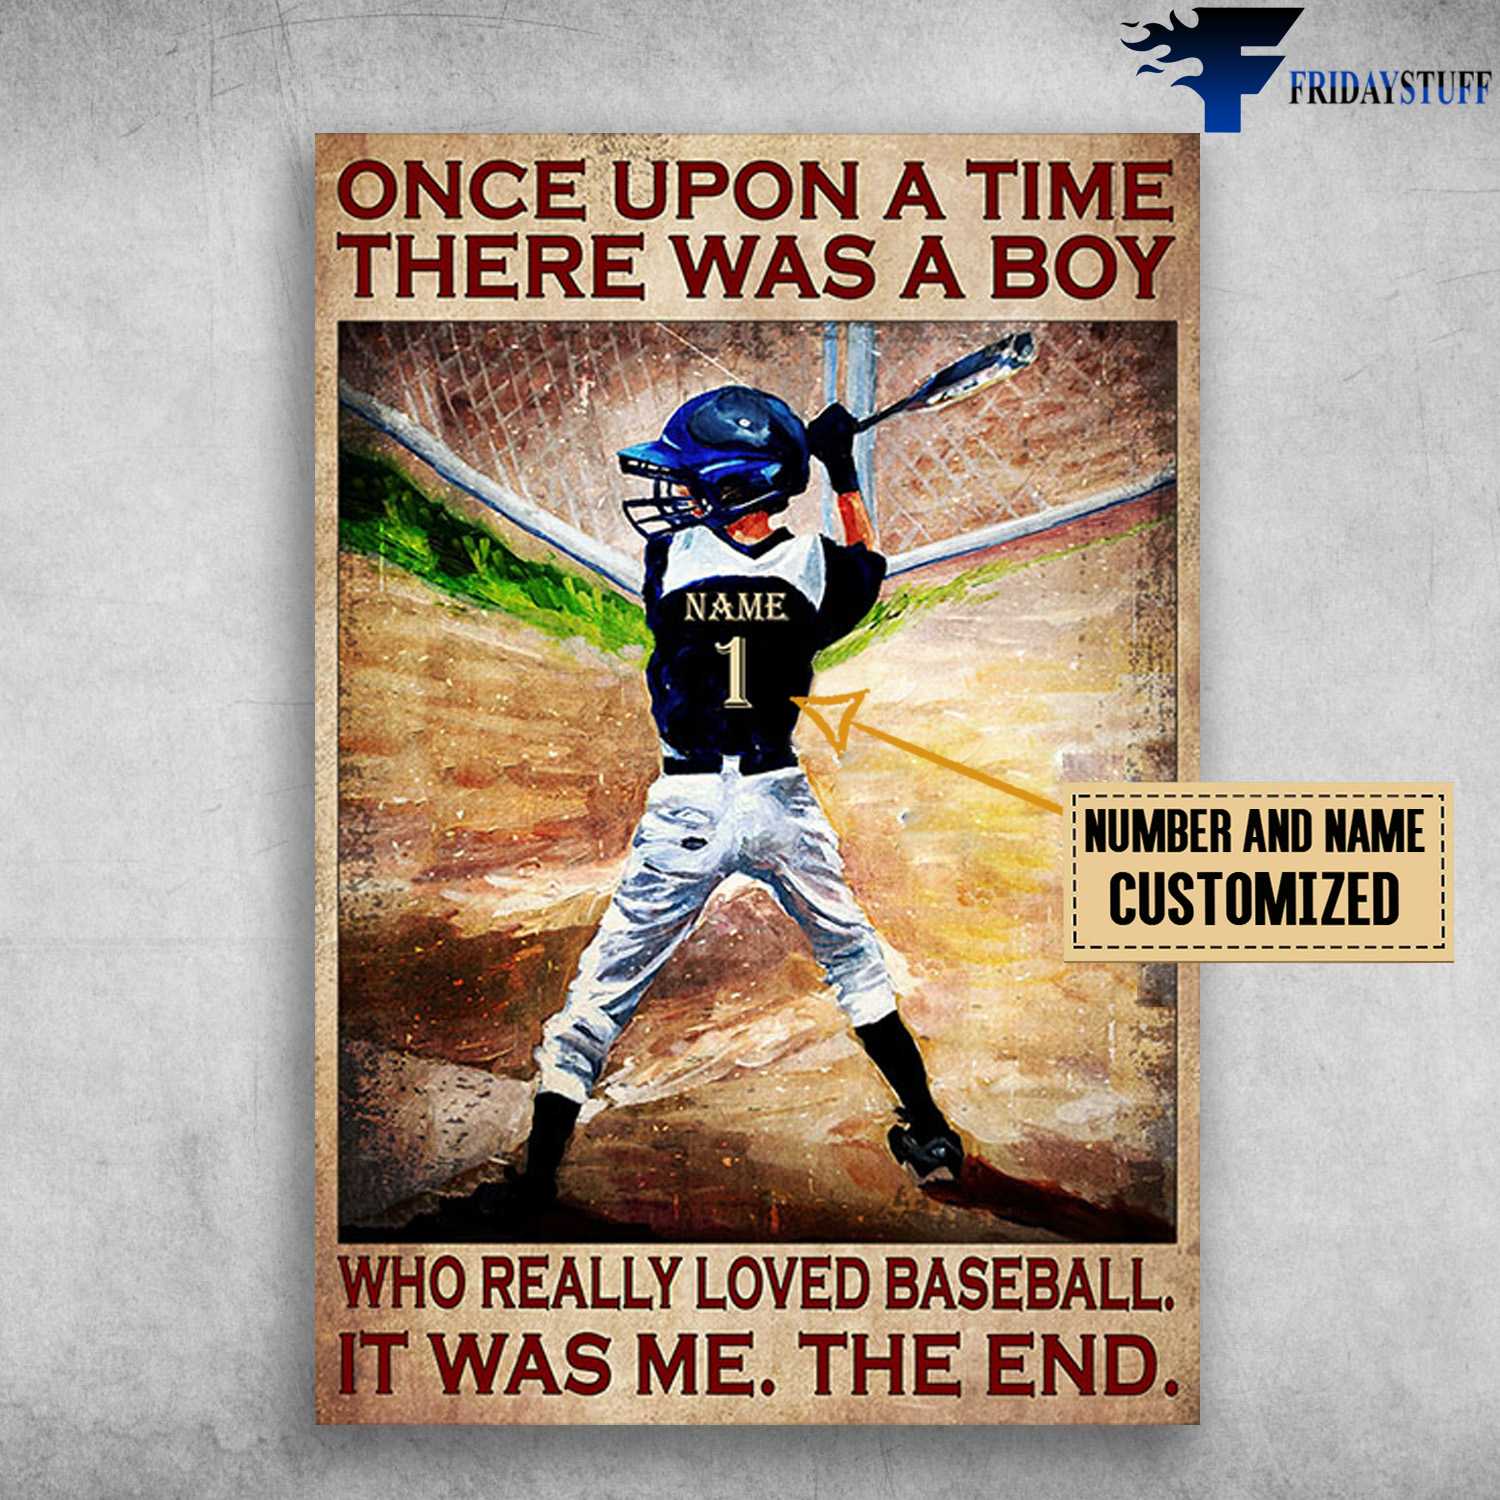 Baseball Player, Once Upon A Time, There Was A Boy, Who Really Loved Baseball, It Was Me, The End